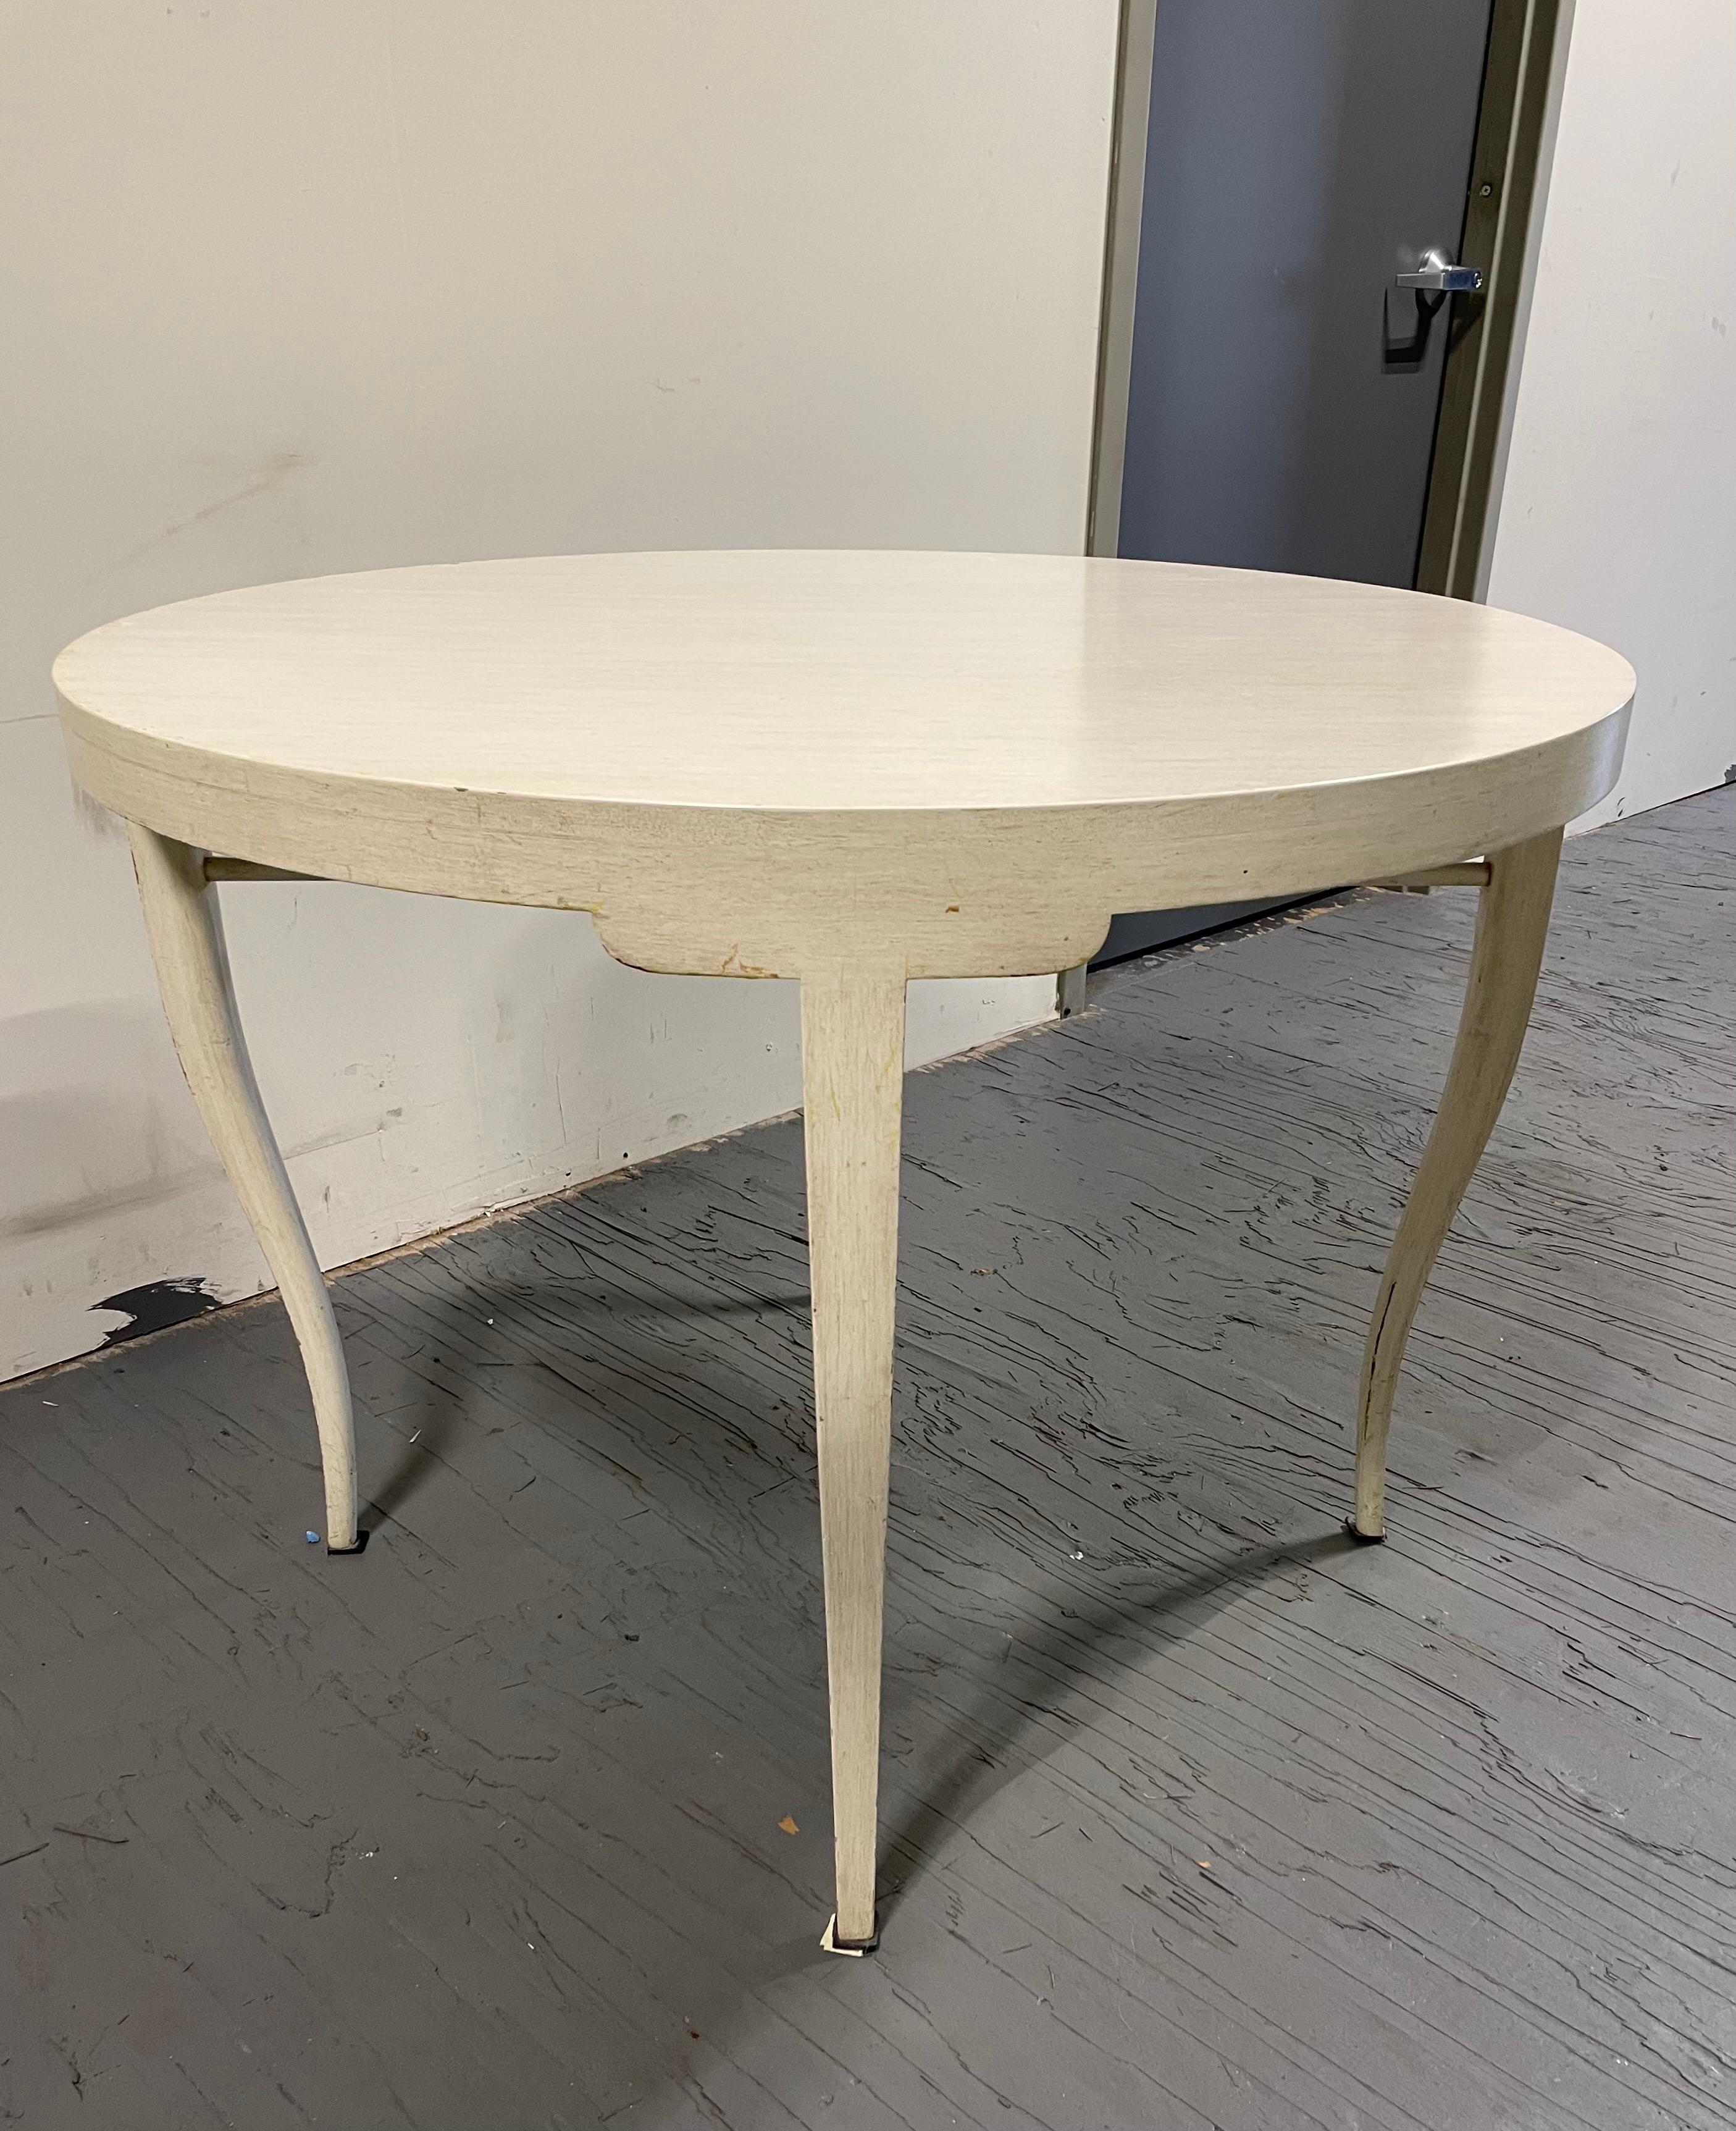 Wonderful sleek and glamorous lines in this game or dining table in the style of Tommi Parzinger. Curvy cabriole legs and underside cross stretcher. White finish in a washed or cerused manner. Table came from an estate that used as a game table with